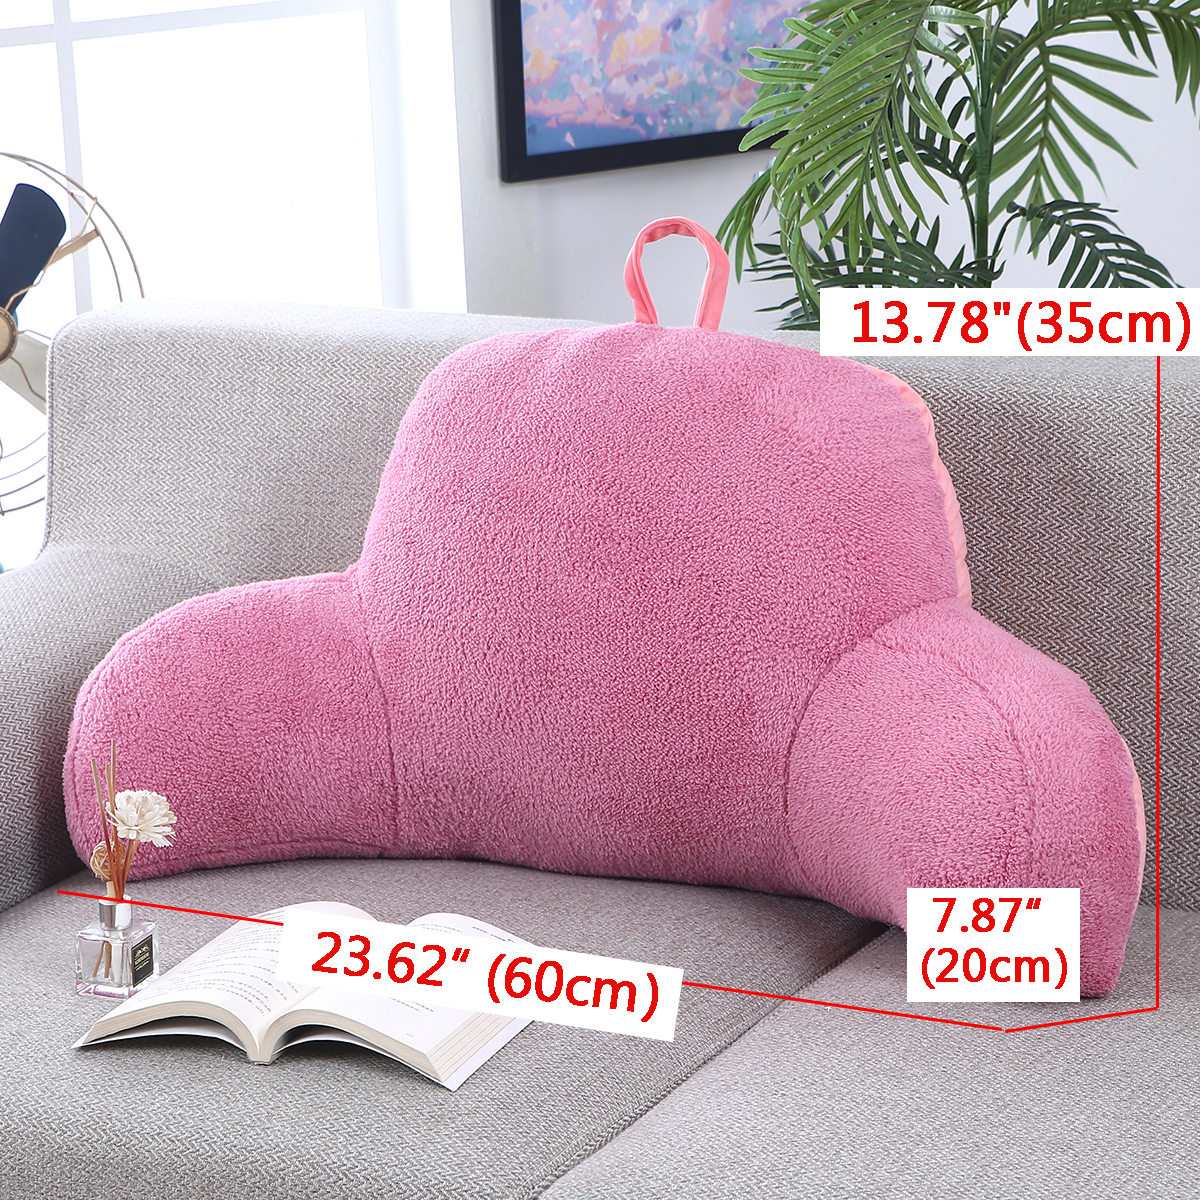 2362inch-PP-Cotton-Filling-Backrest-Pillow-Bed-Cushion-Support-Reading-Back-Rest-Arms-Chair-For-Home-1812076-6